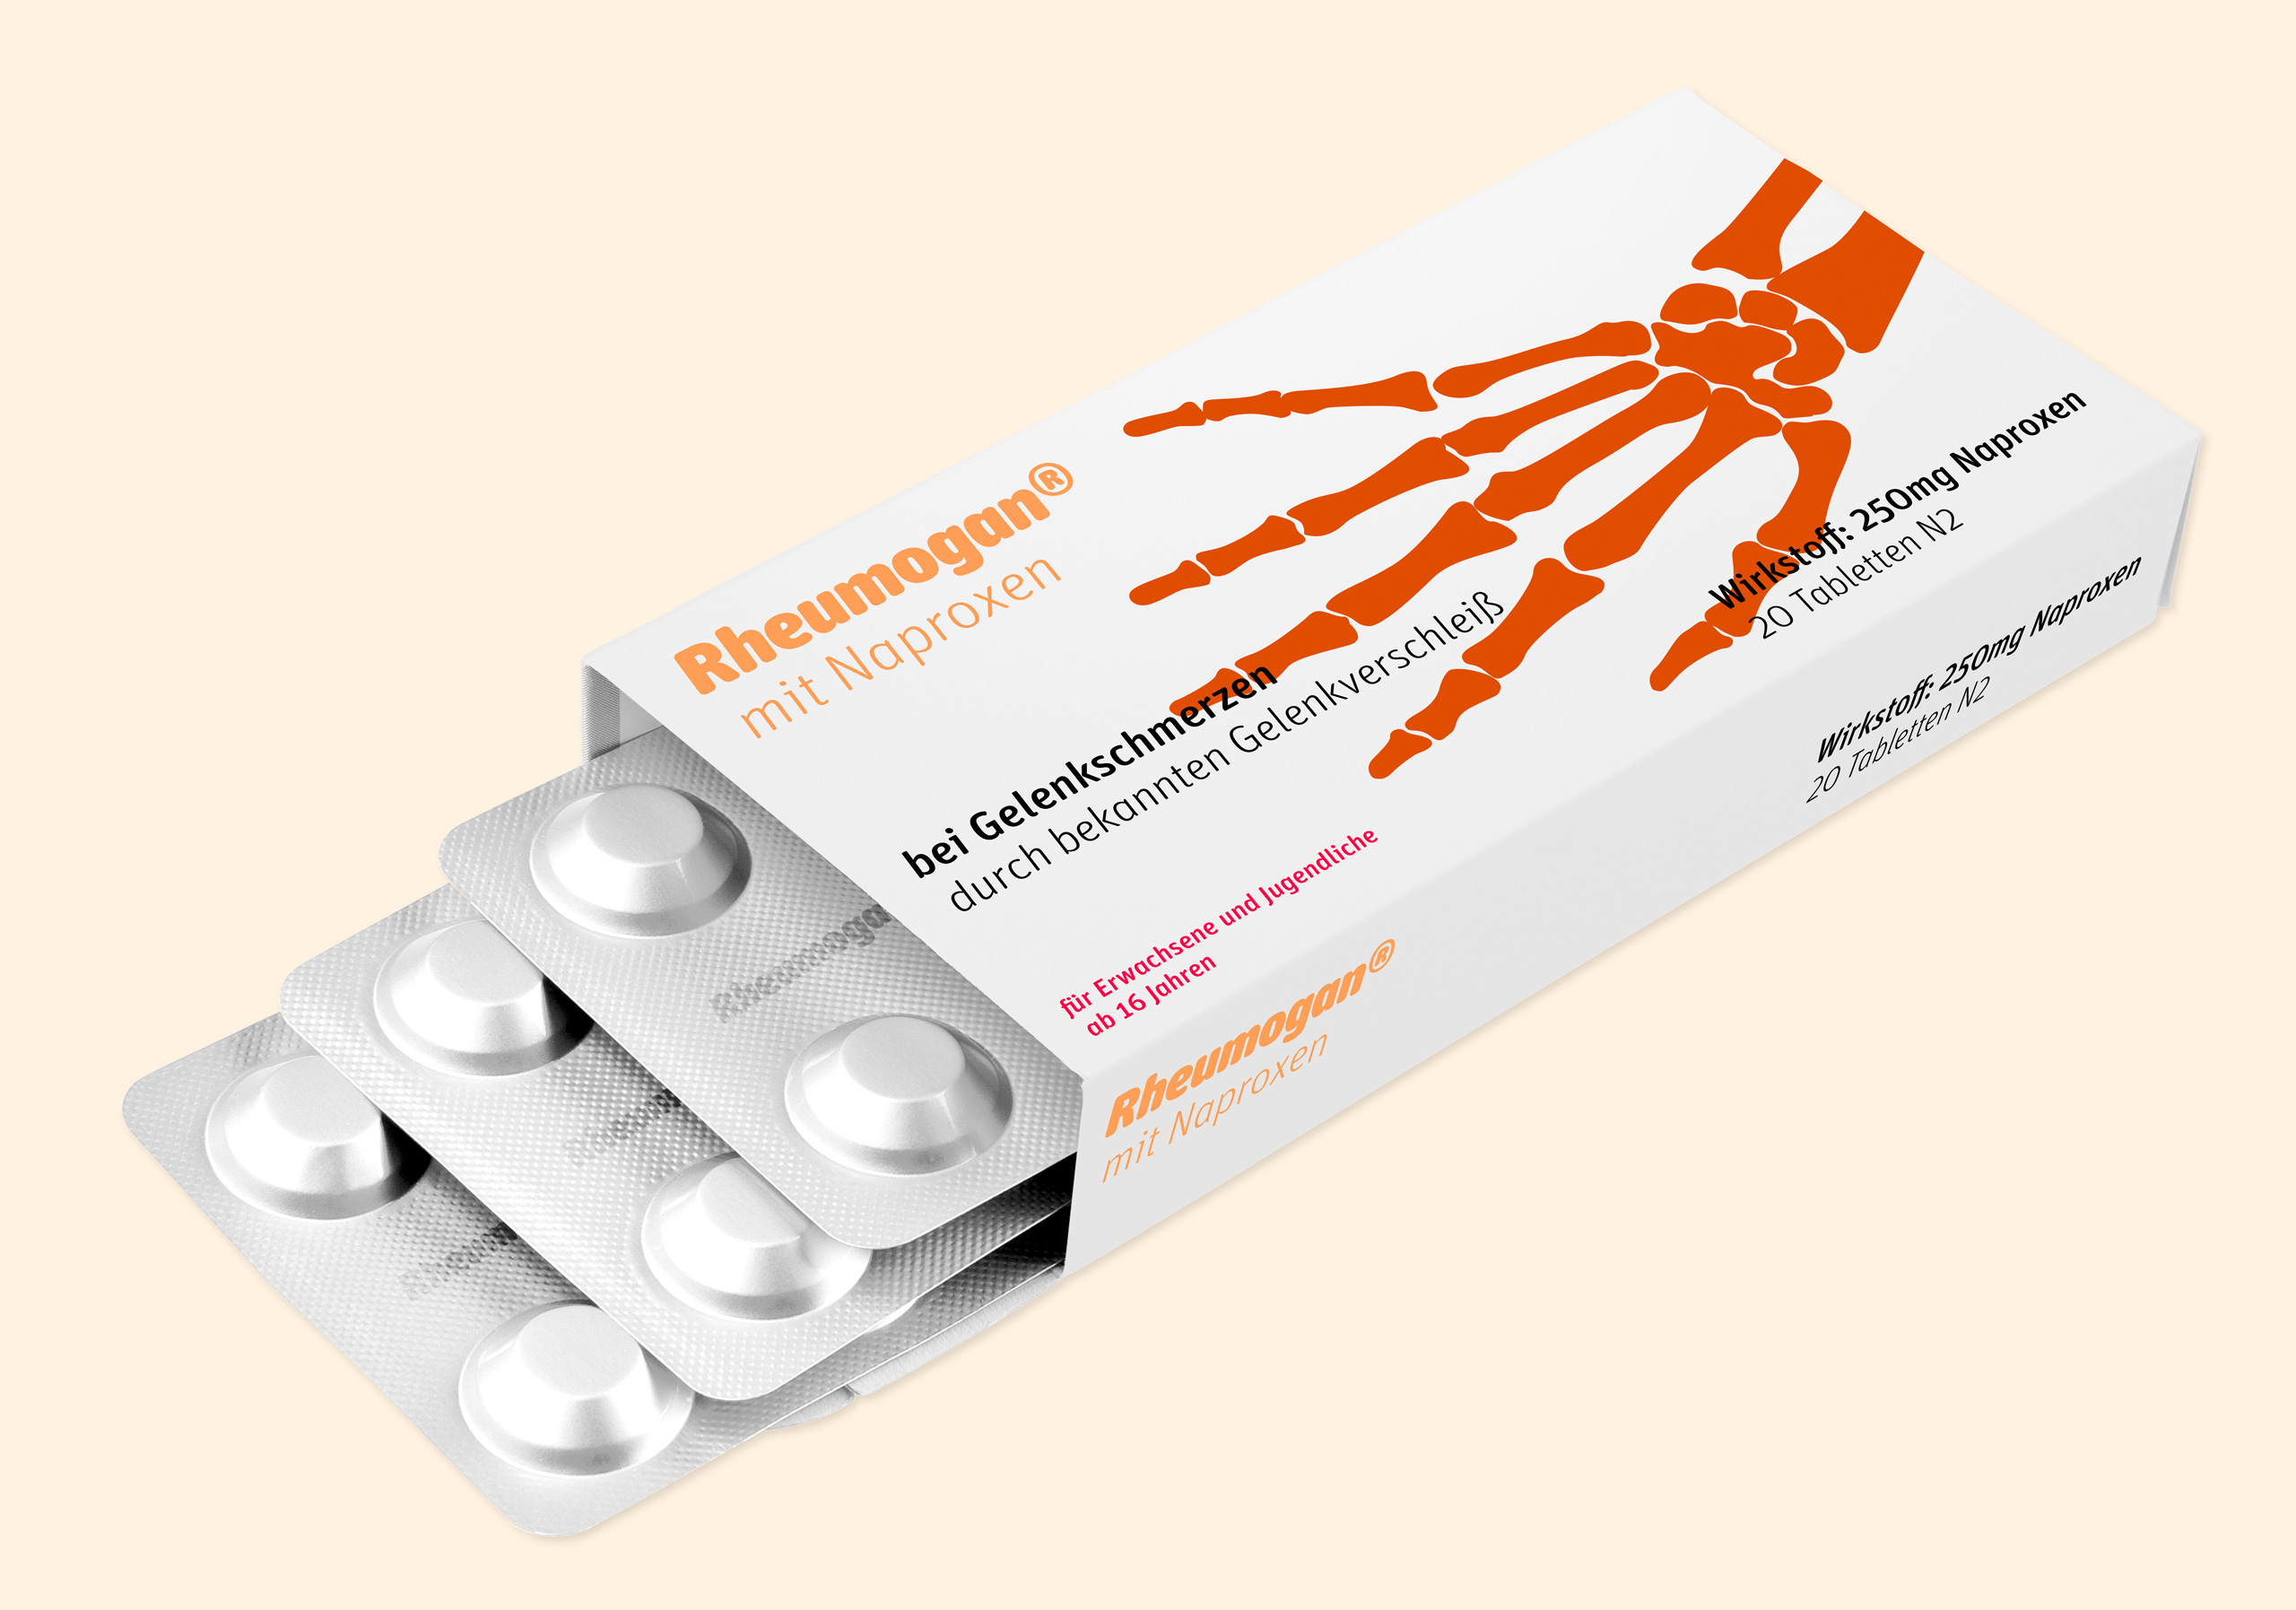 Made for signage, but quite usable in up-close work as well, like labeling pharmaceuticals